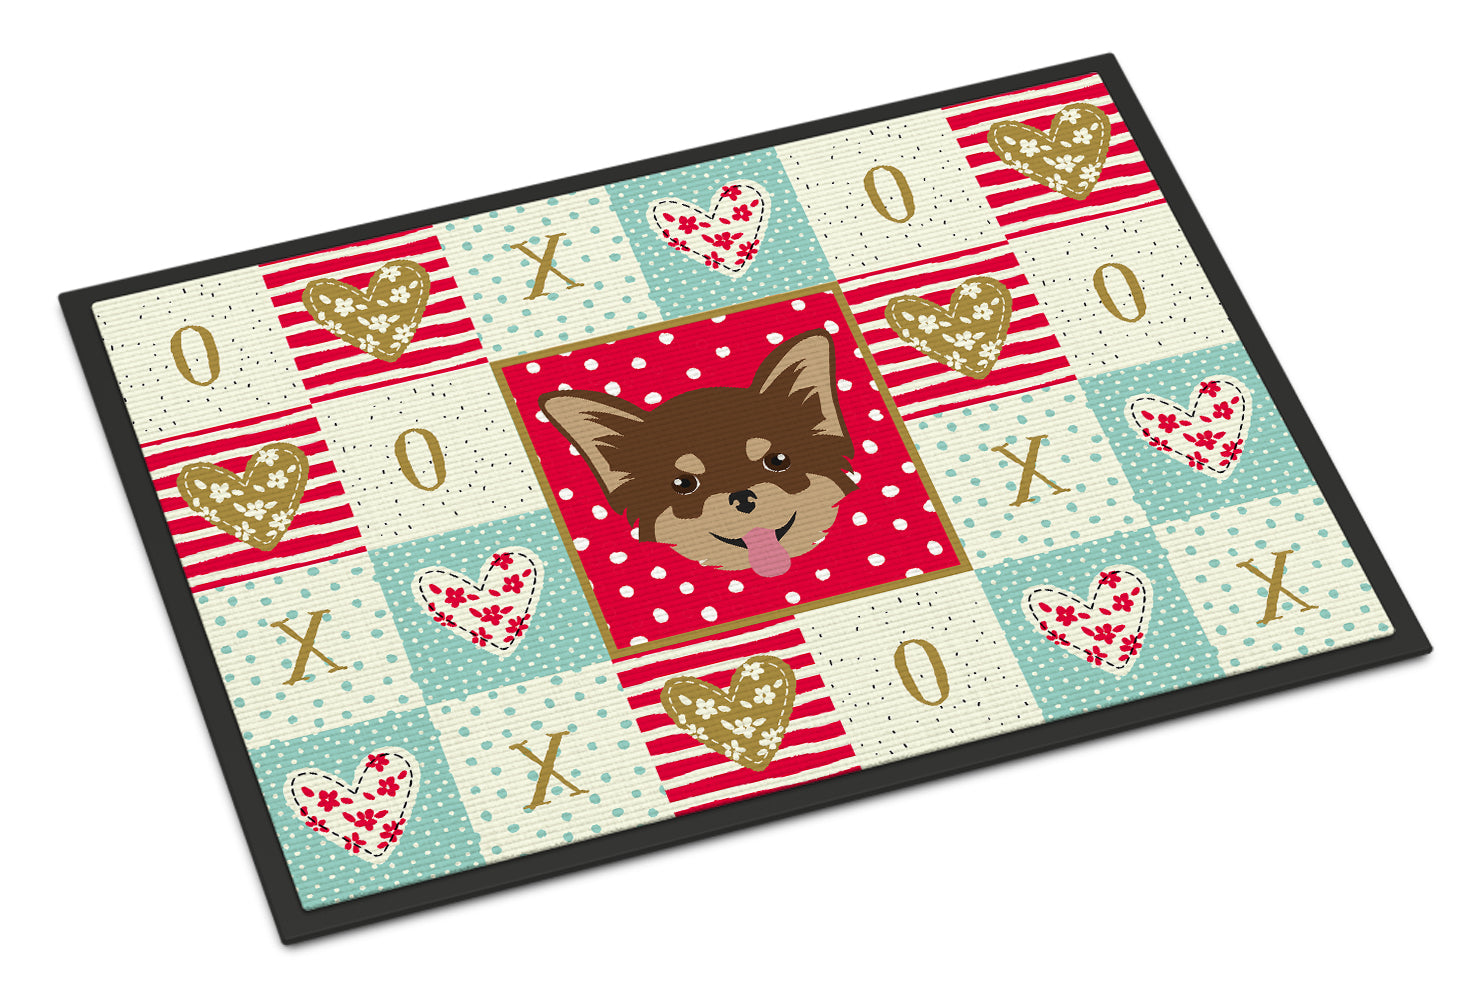 Chihuahua Love Indoor or Outdoor Mat 18x27 CK5190MAT - the-store.com